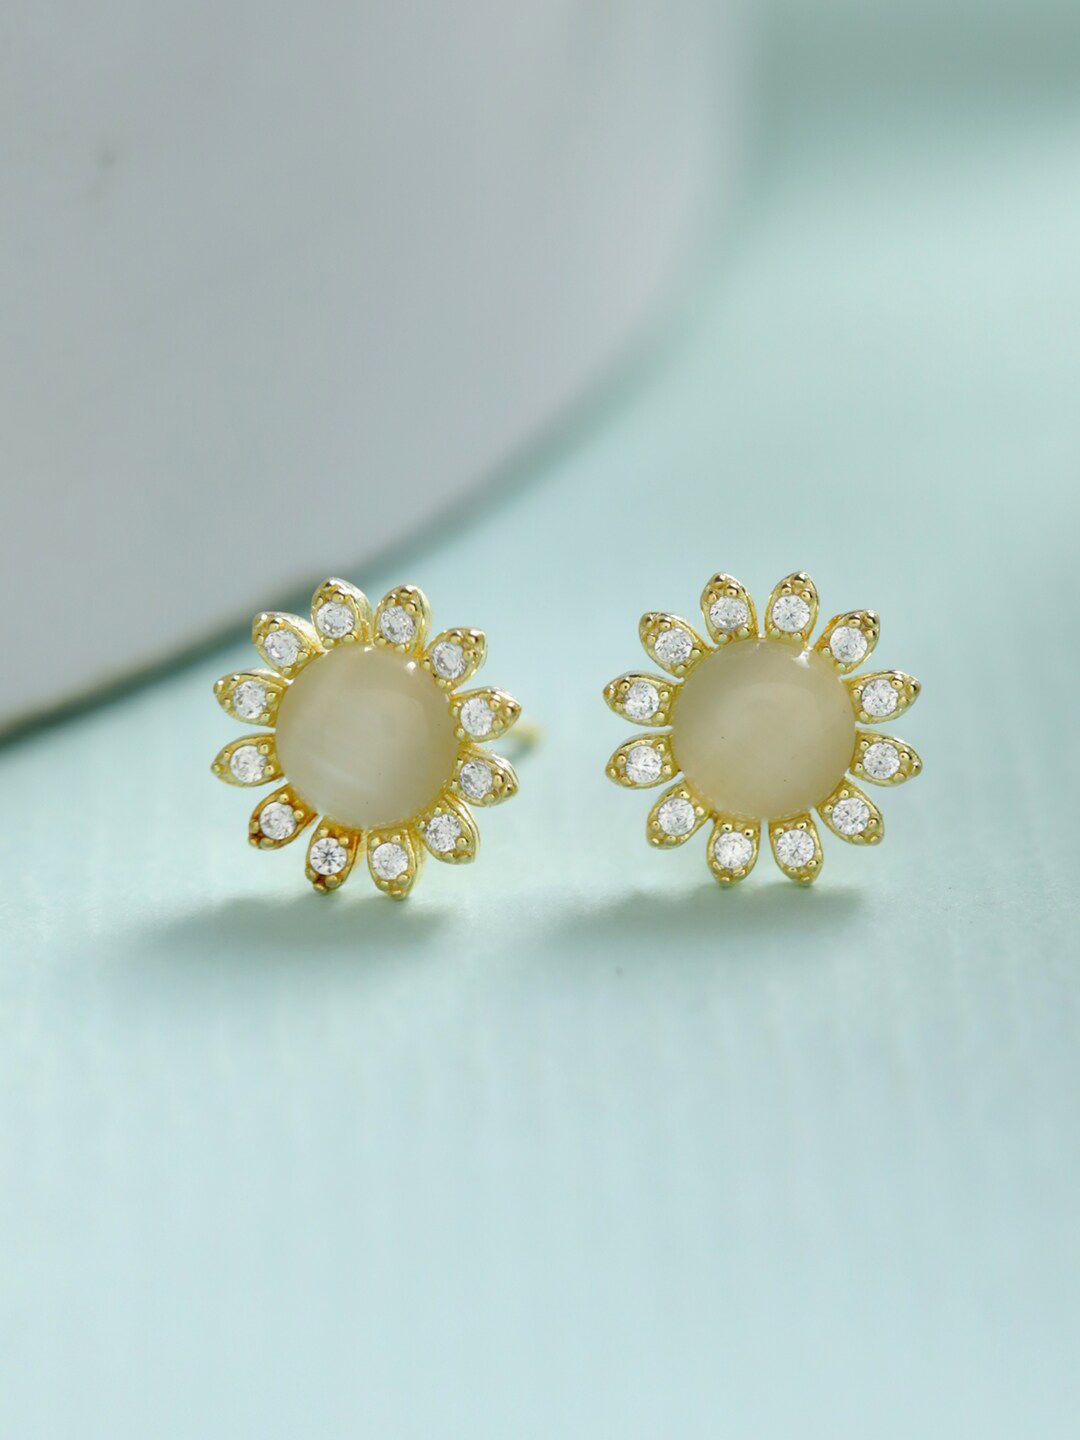 sheer by priyaasi white & gold-plated floral shape sterling silver studs earrings